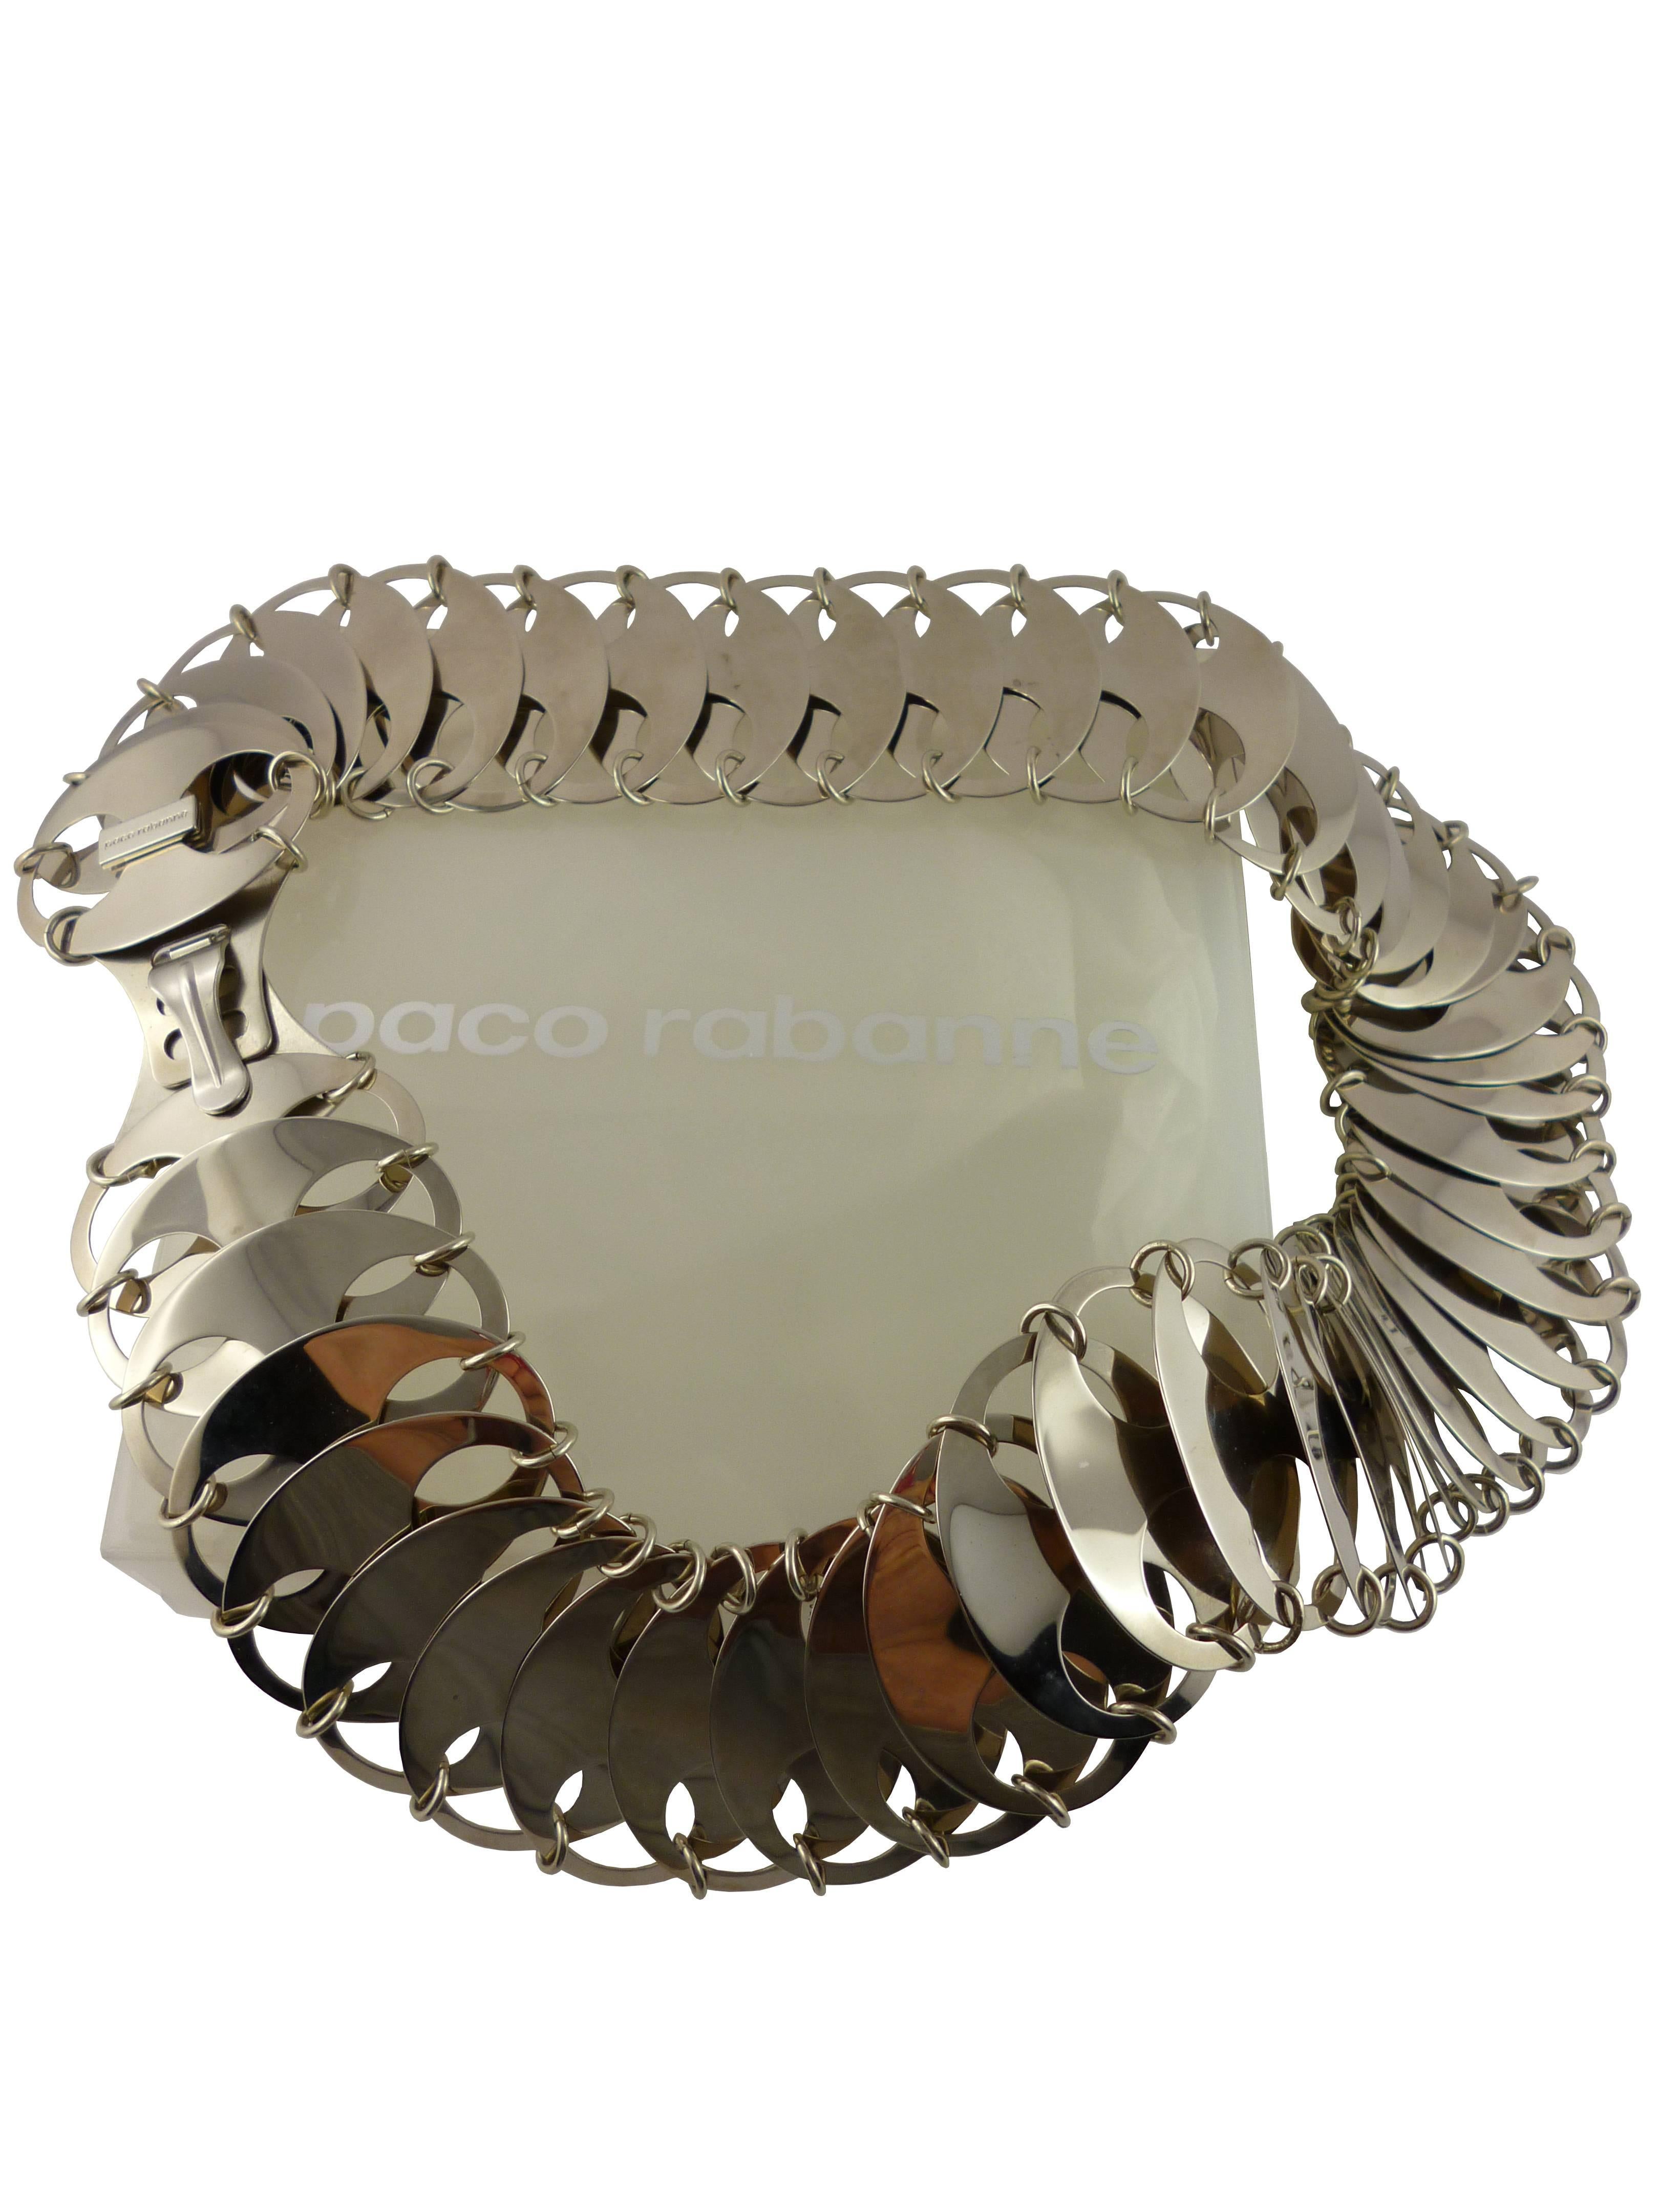 PACO RABANNE stunning iconic metal chain mail disk belt.

Hook closure.

One size fits all.
Length of this belt can be adjusted by removing extra discs.

Marked Paco Rabanne.

Comes with its original box.

BELT CONDITION CHART
- New or